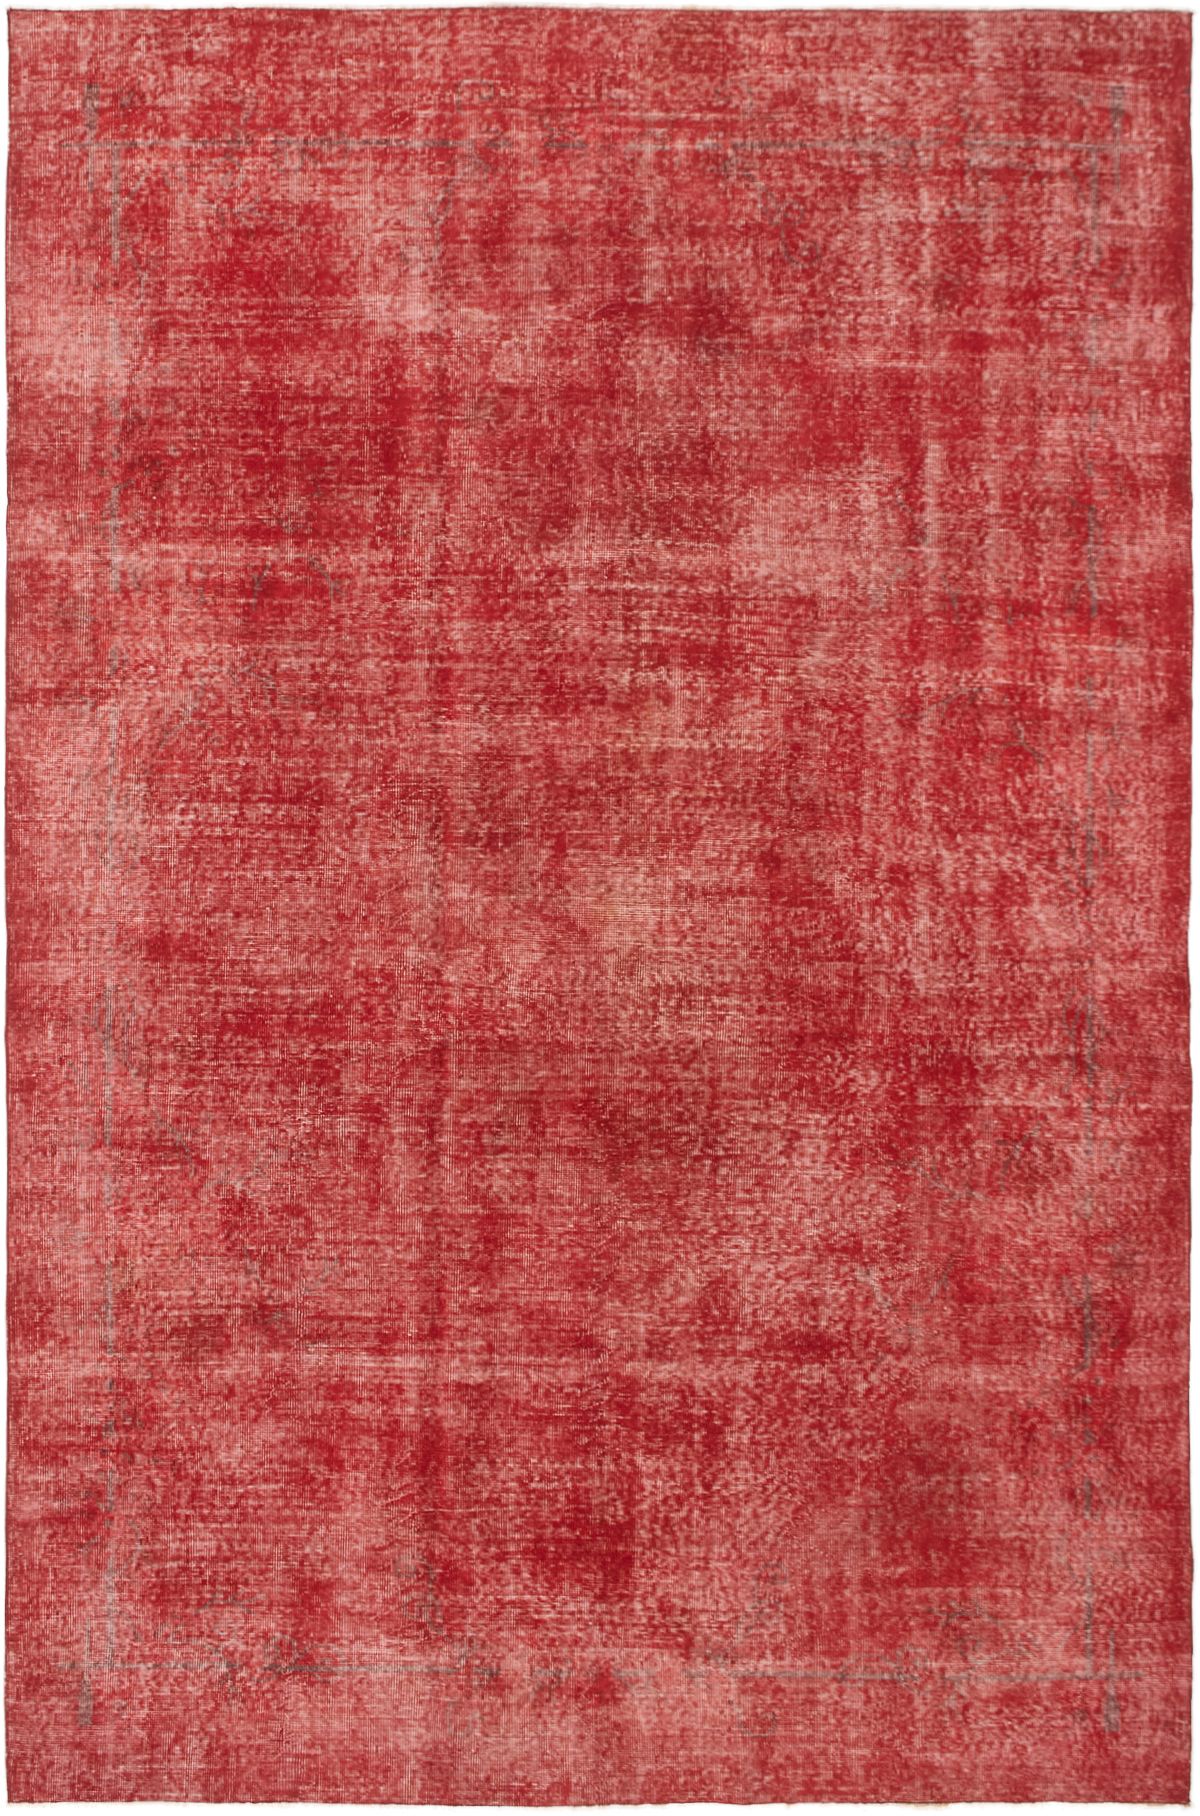 Hand-knotted Color Transition Dark Red Wool Rug 6'7" x 10'4" Size: 6'7" x 10'4"  